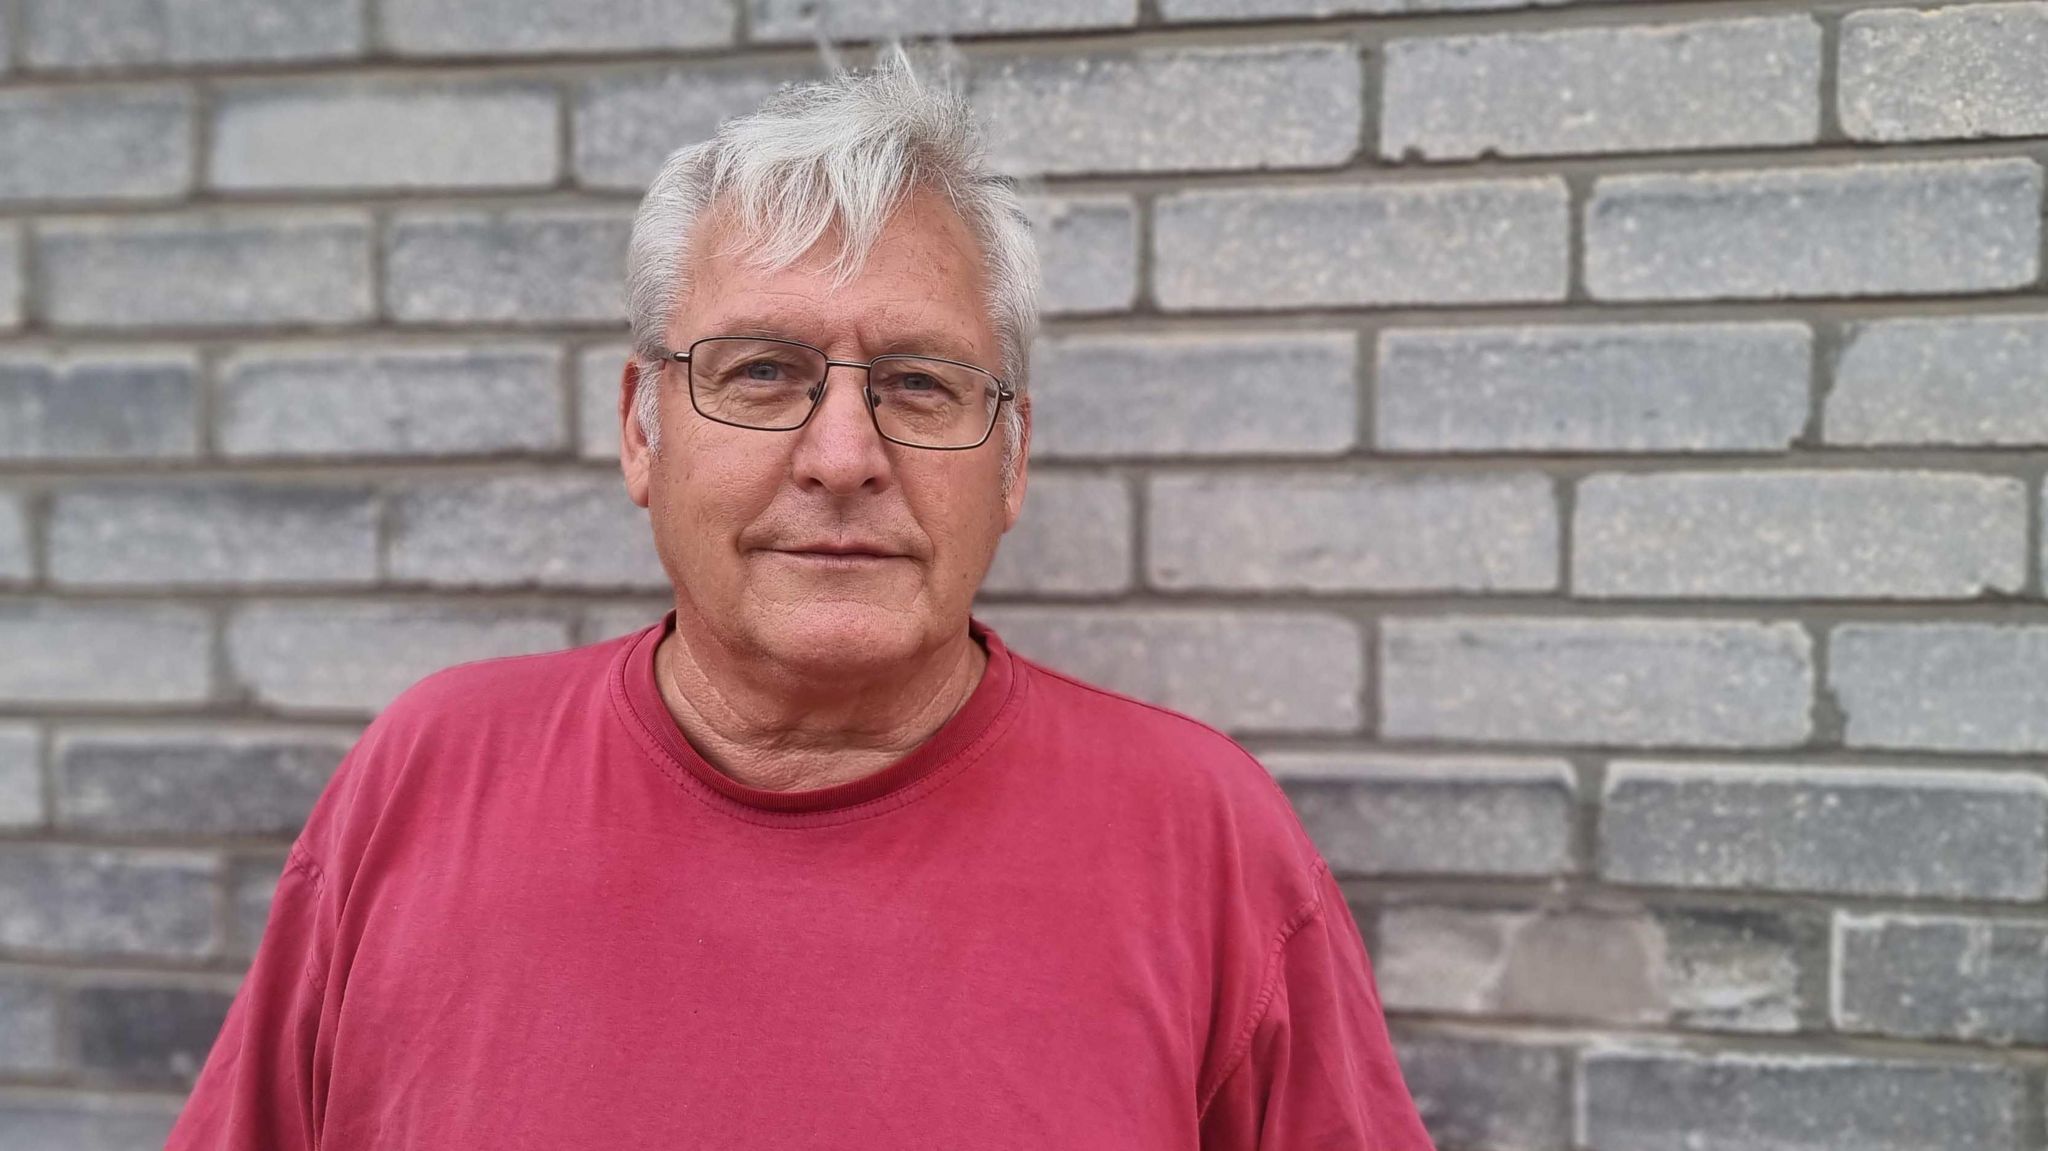 A head and shoulder shot of Prof David Martill, taken against a grey brick wall. He has short, white hair, and wears thin-rimmed rectangular glasses and a red T-shirt